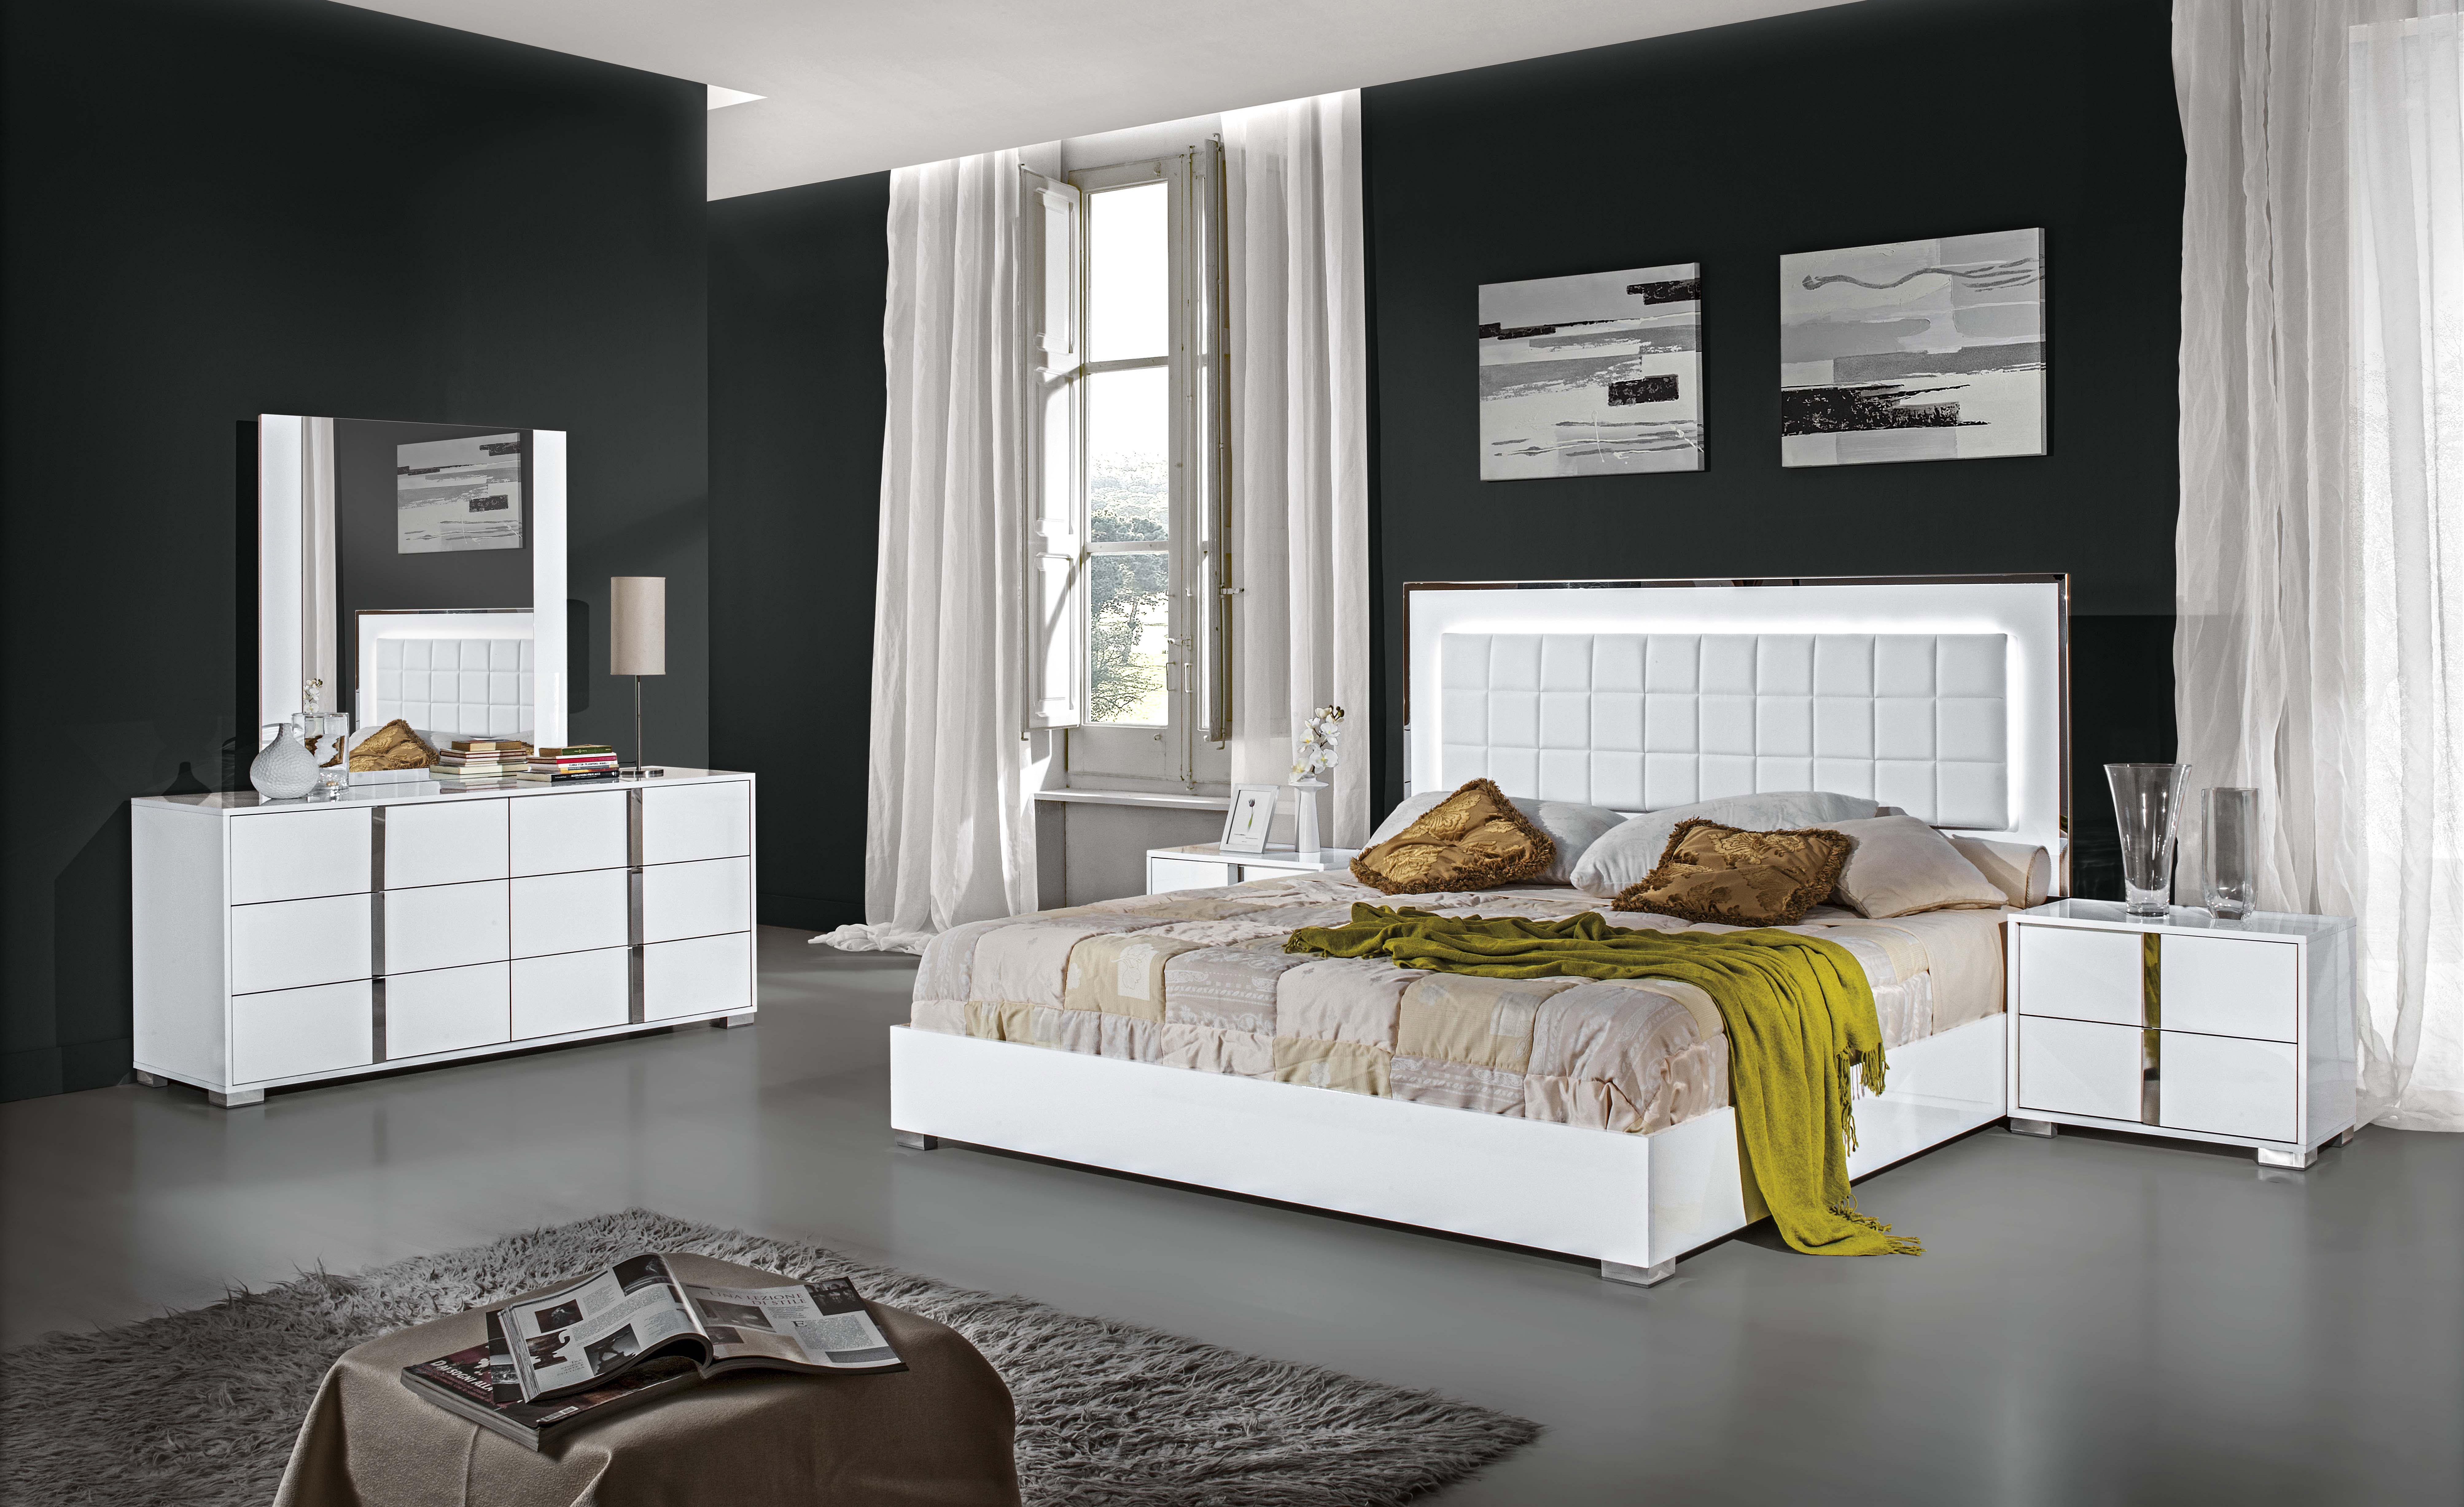 Made in Italy Wood High End Bedroom Furniture feat Light ...